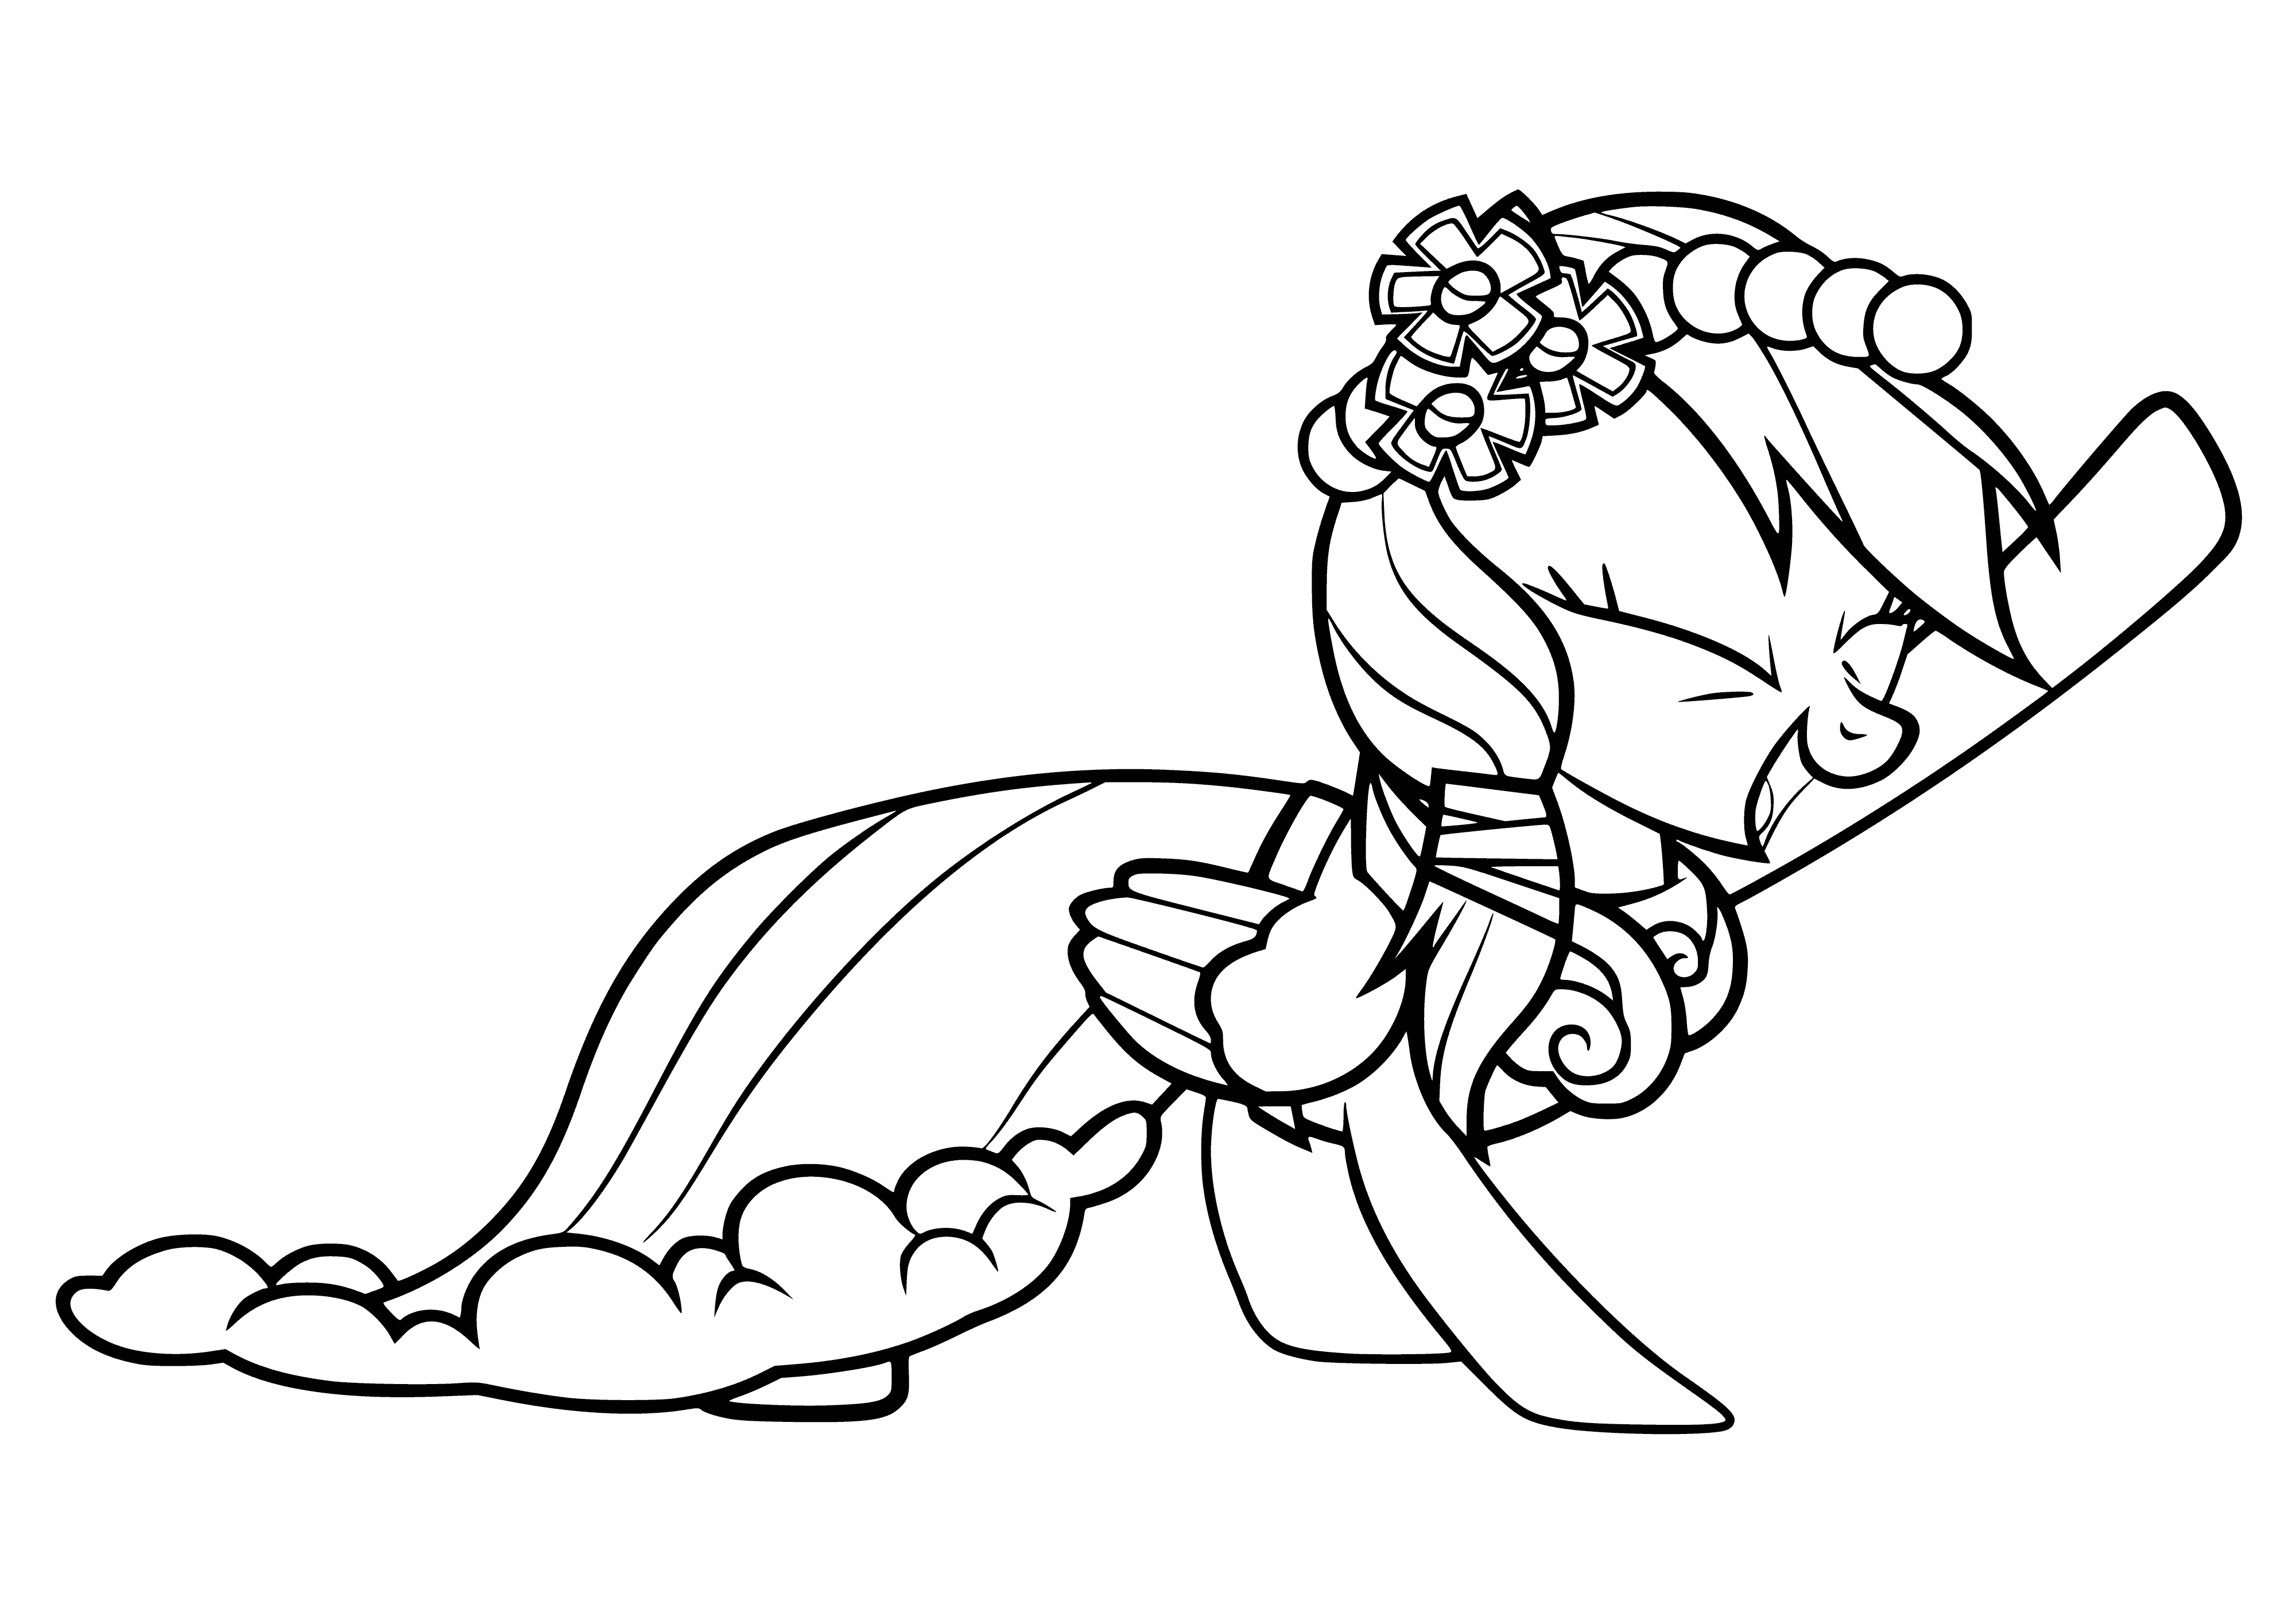 coloring page: A blue horse with rainbow mane and tail stands on hind legs with wings spread out. #coloringpage